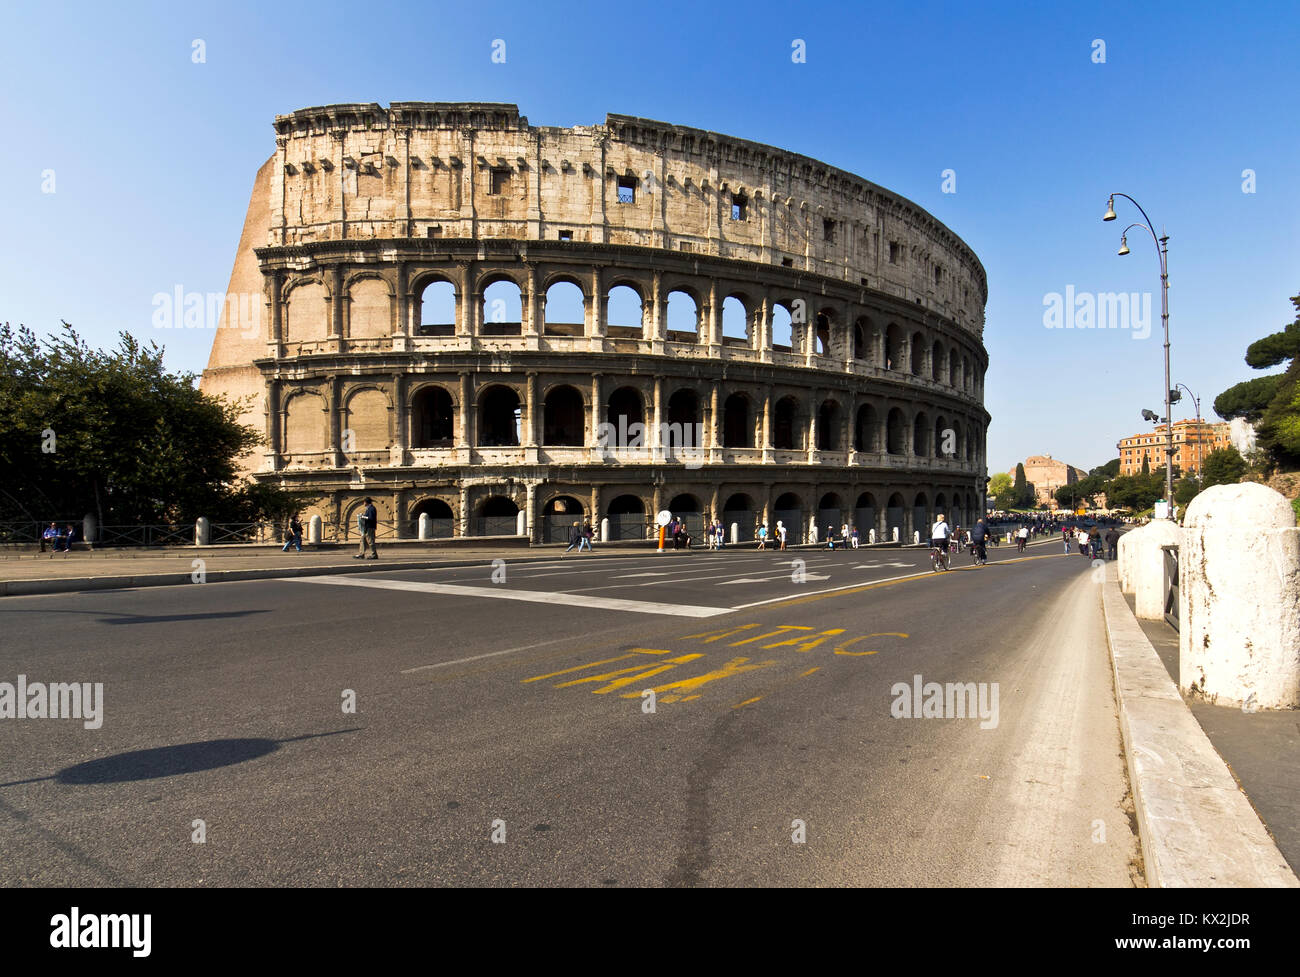 the Colosseum on a Sunday in spring Stock Photo